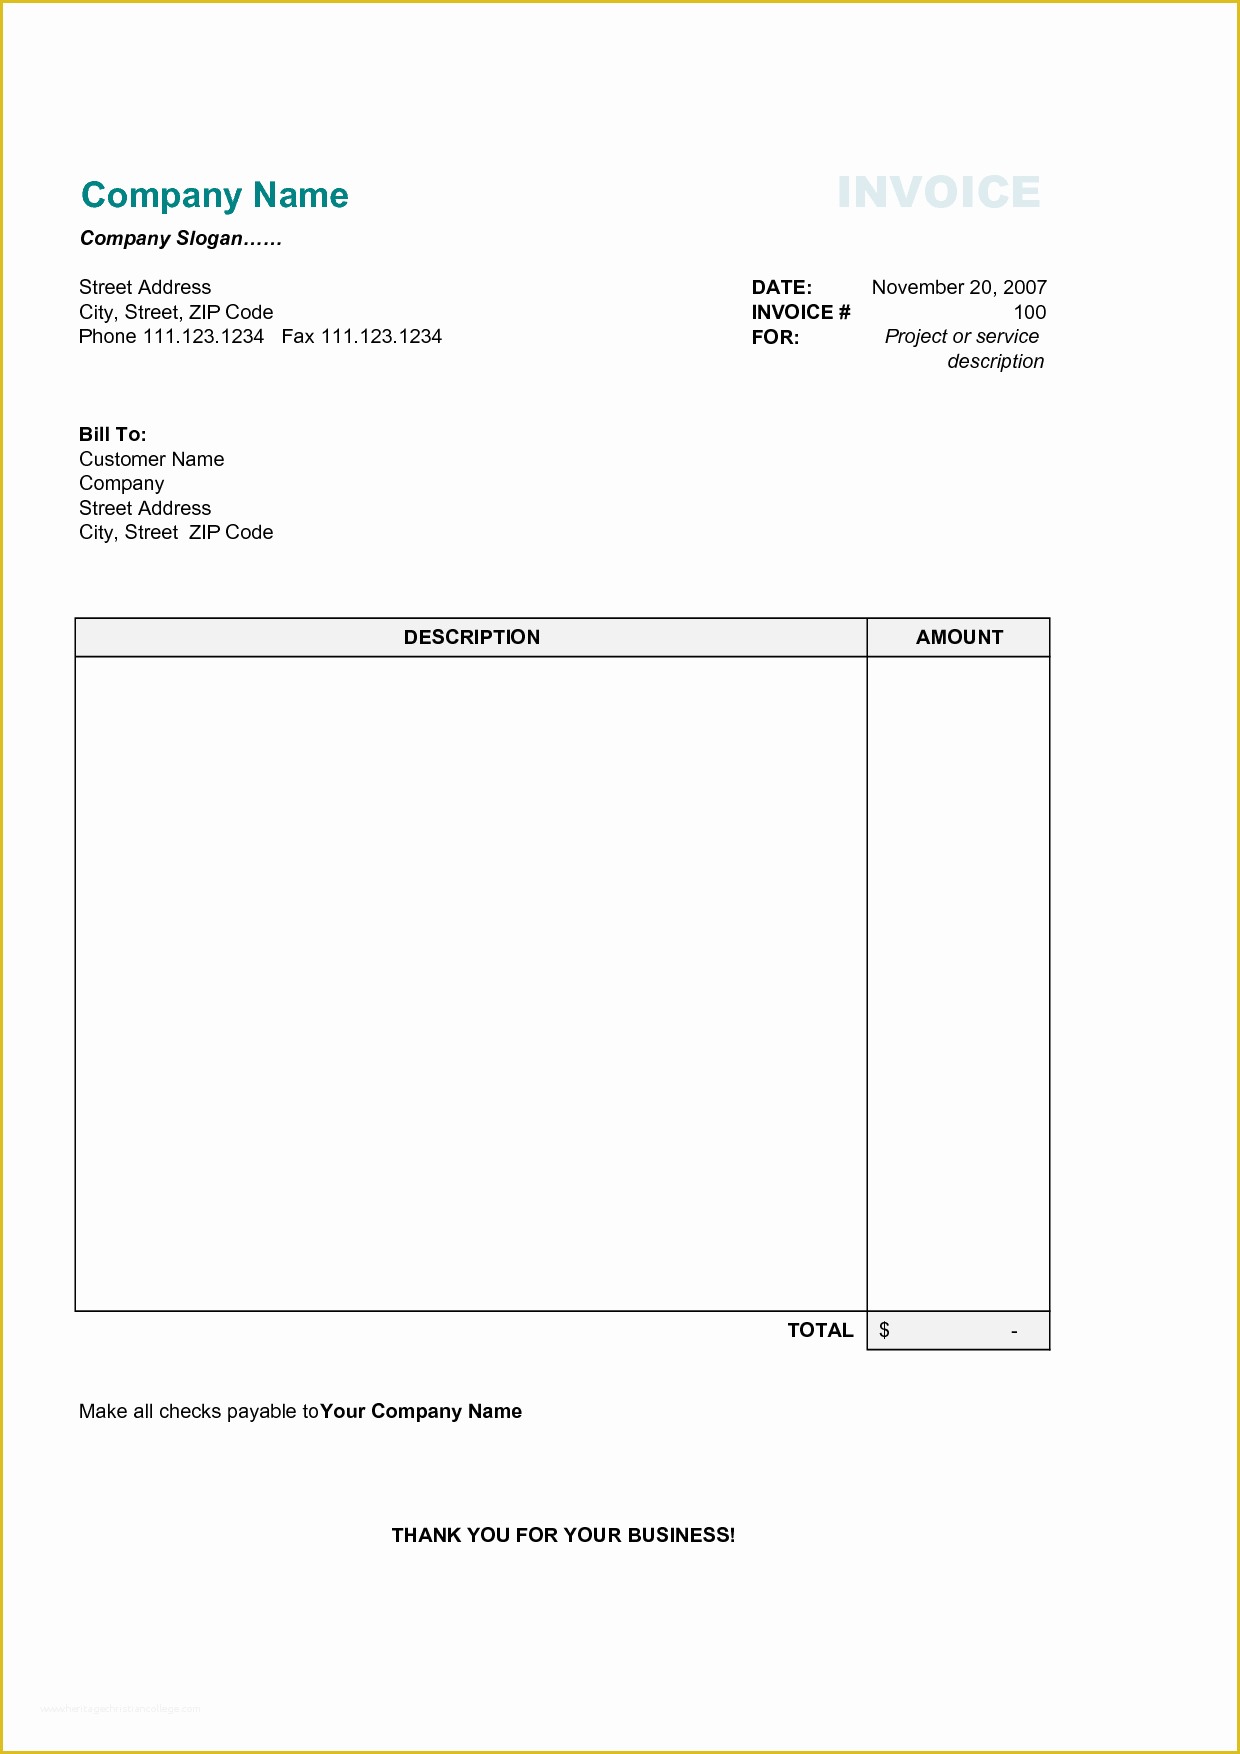 Free Invoice Template for Word 2010 Of Invoice Template Category Page 1 Efoza